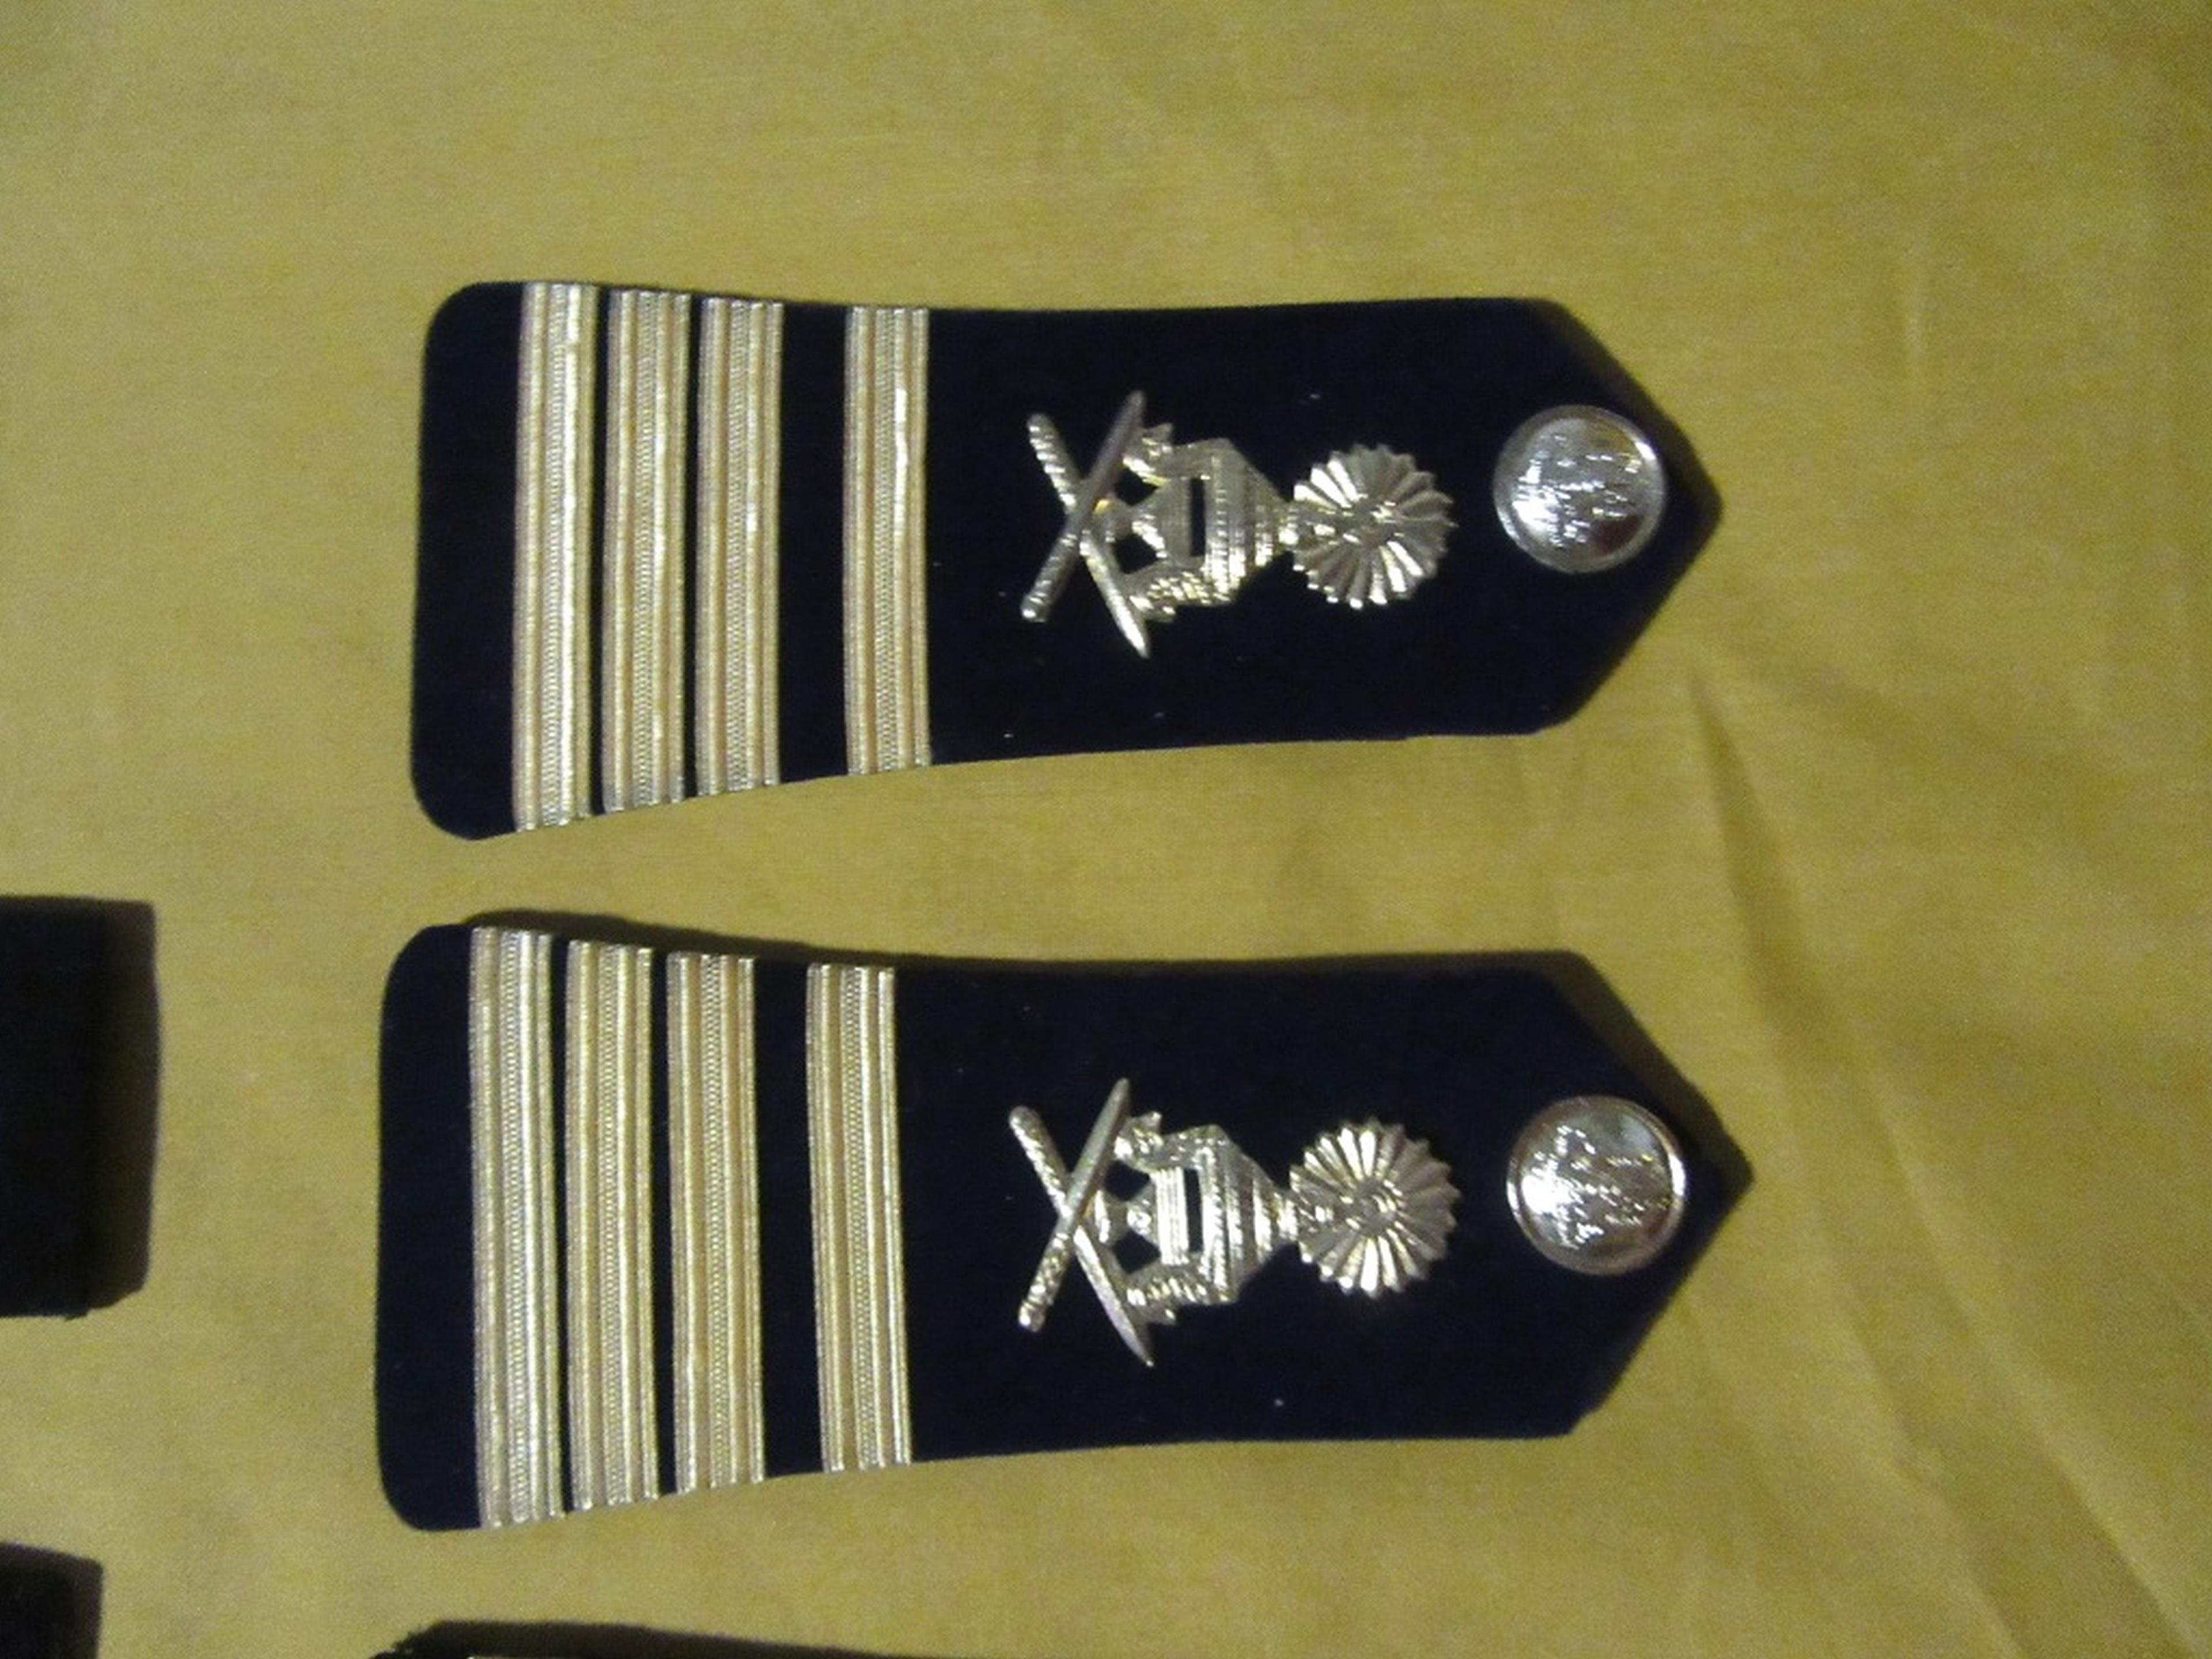 MILITARY SHOULDER PATCHES